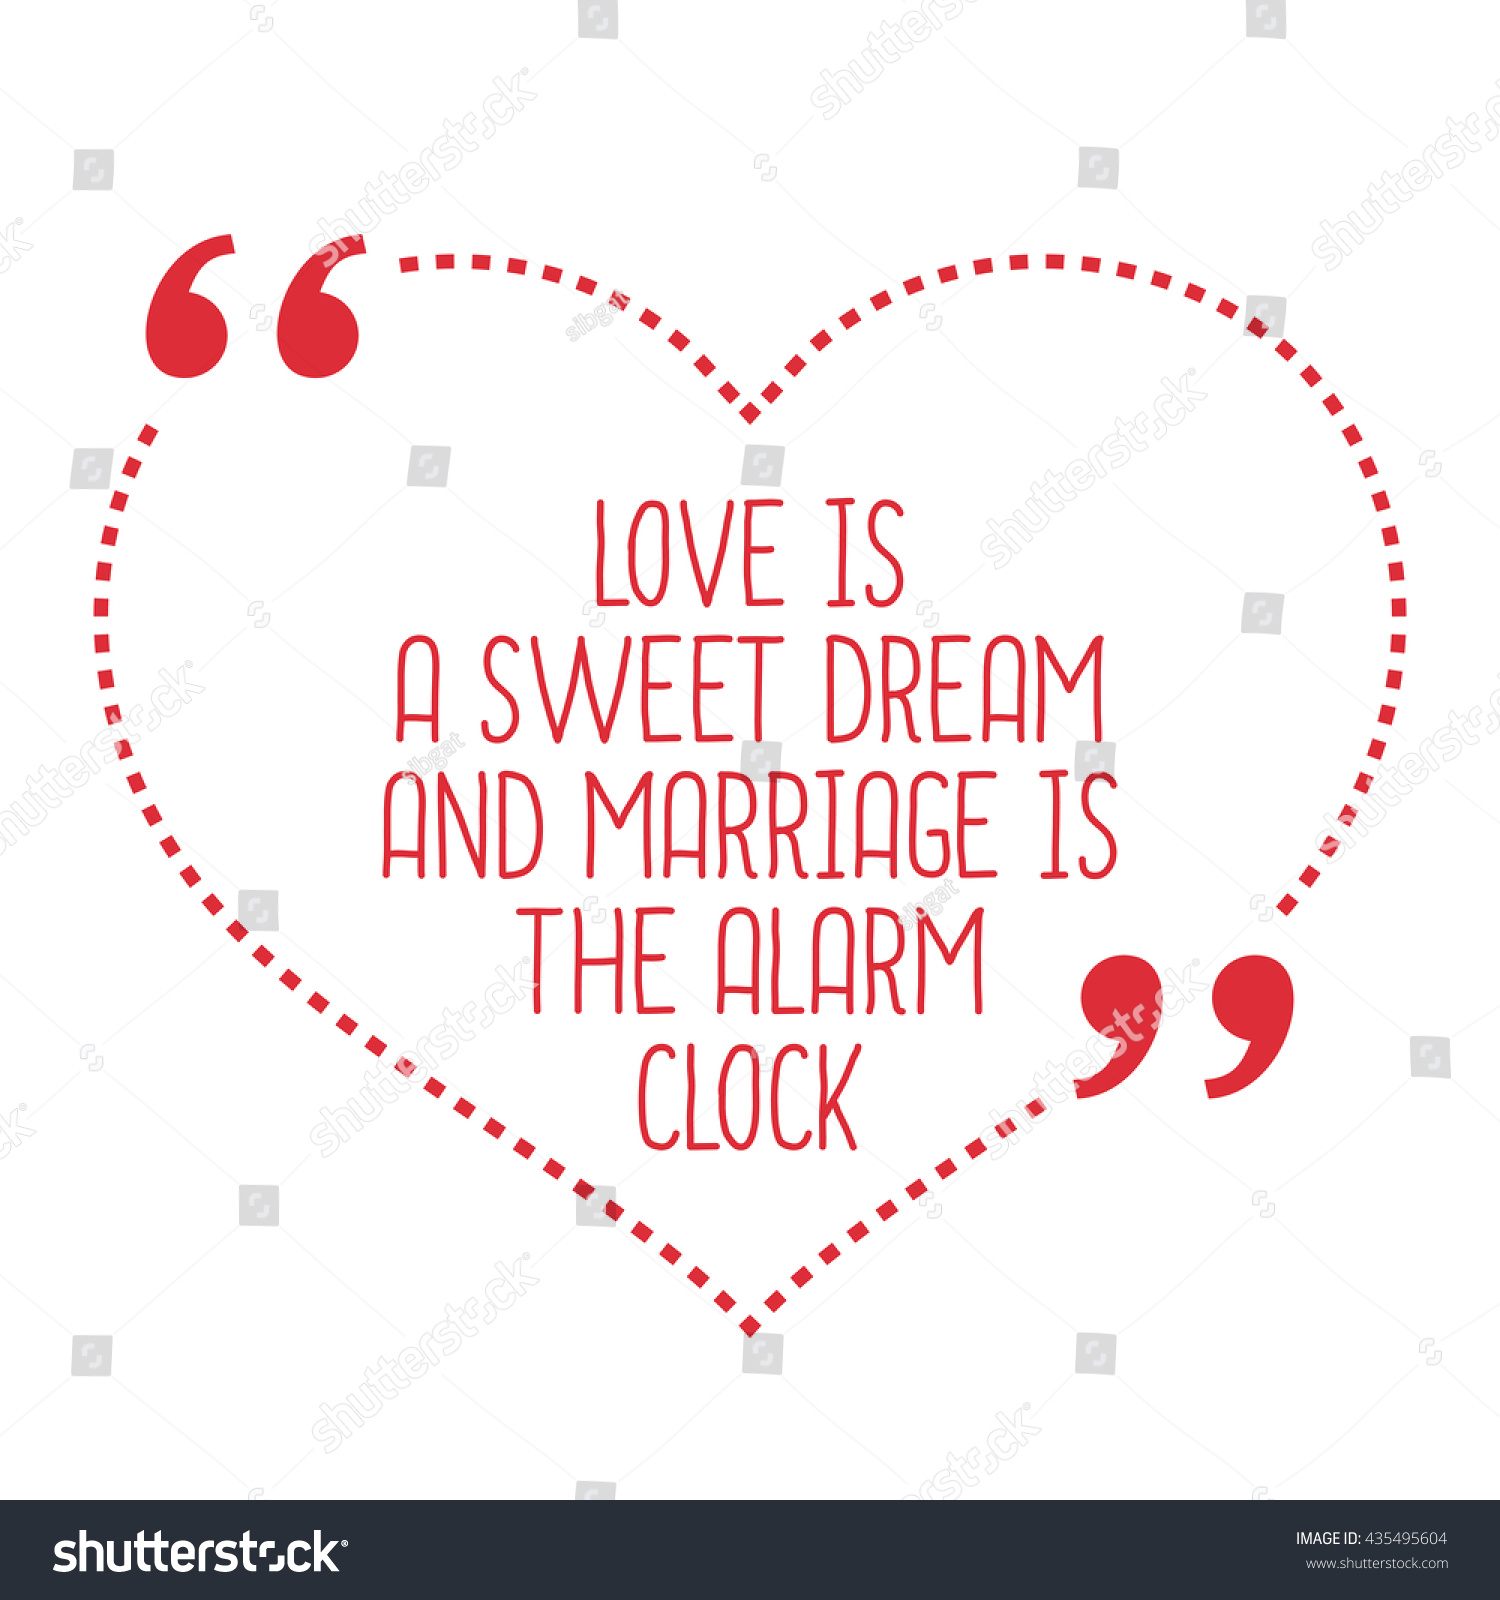 Funny love quote Love is a sweet dream and marriage is the alarm clock